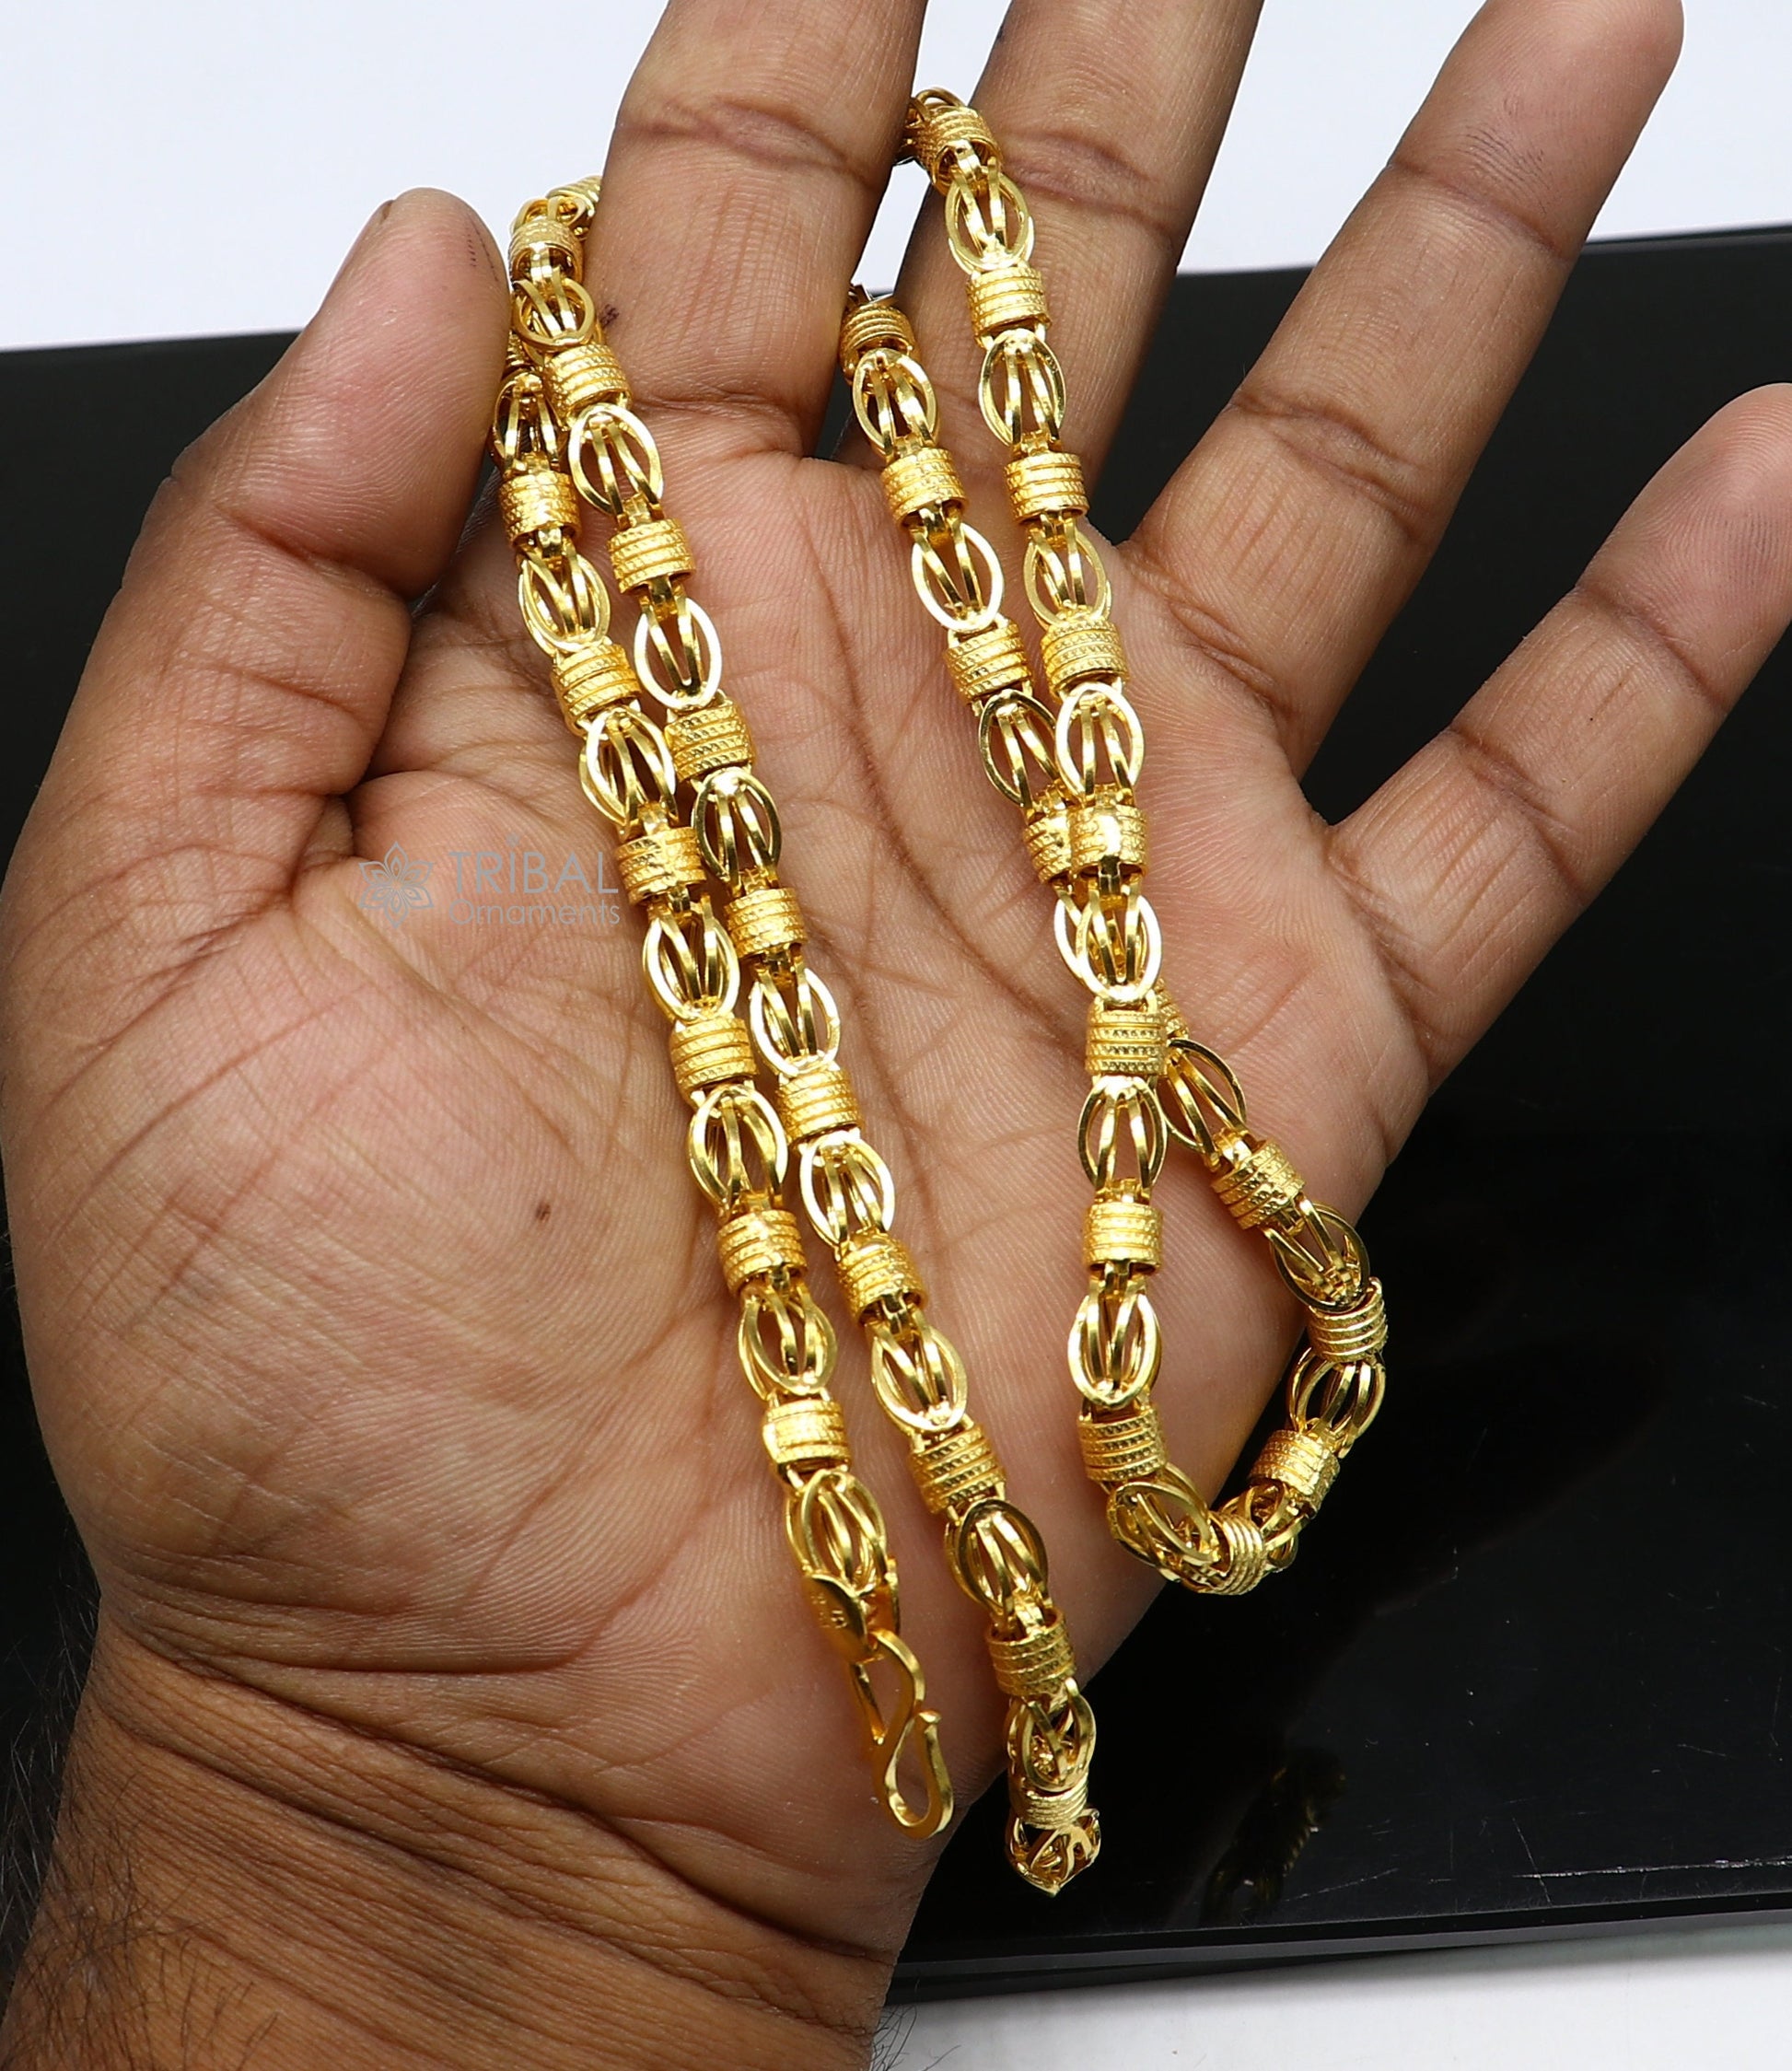 22kt yellow gold royal Handmade unique byzantine chain, fabulous customized men's chain, men's functional gifting chain necklace gch591 - TRIBAL ORNAMENTS